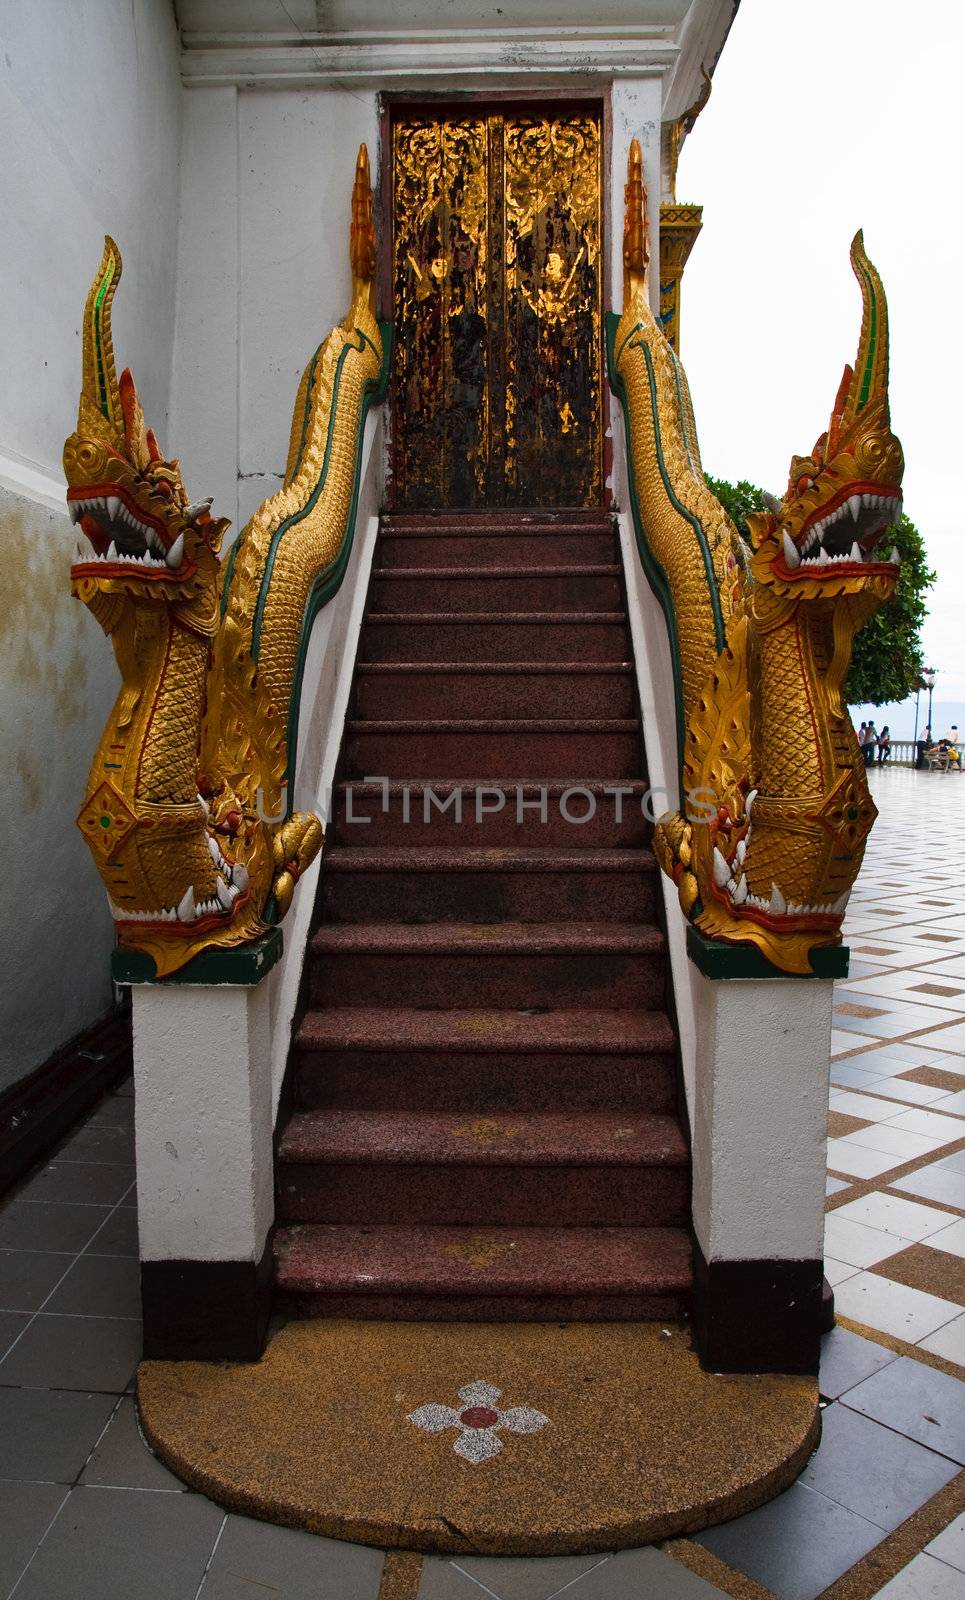 Golden nagas staircase in Wat Doi suthep temple, Chiang Mai